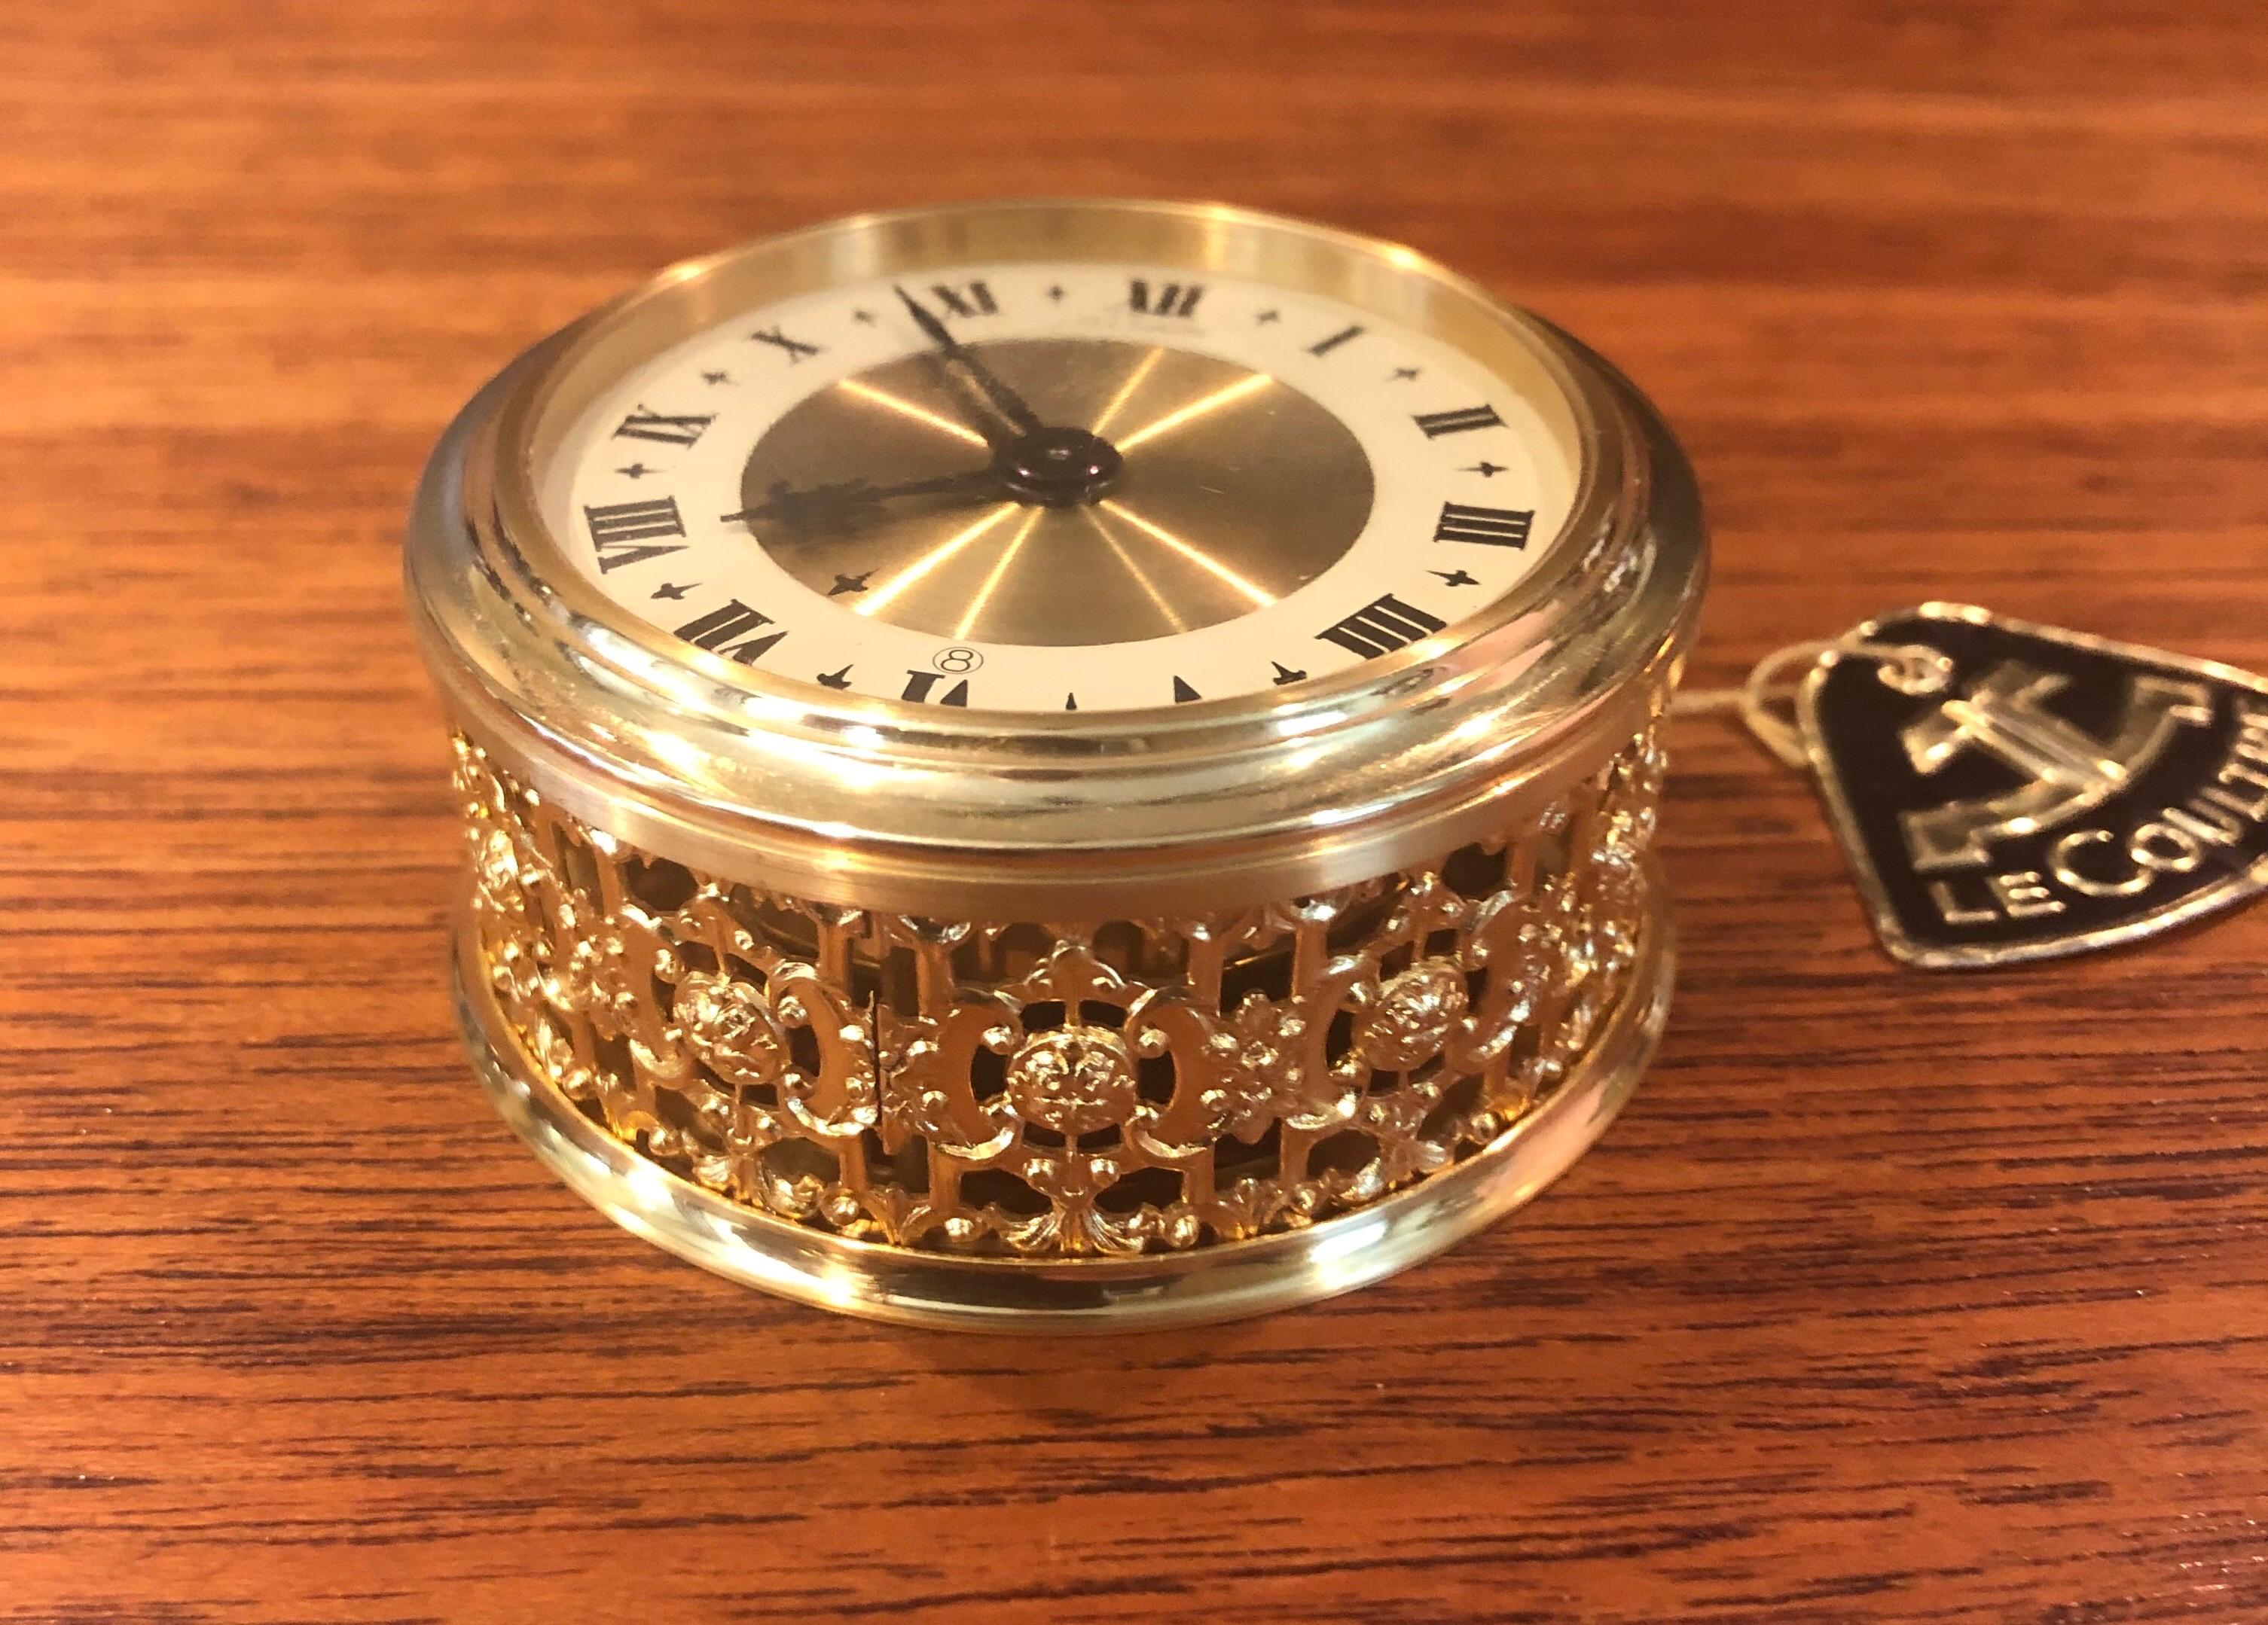 20th Century Vintage Brass Eight Day Miniature Travel Alarm Clock by LeCoultre New in Box